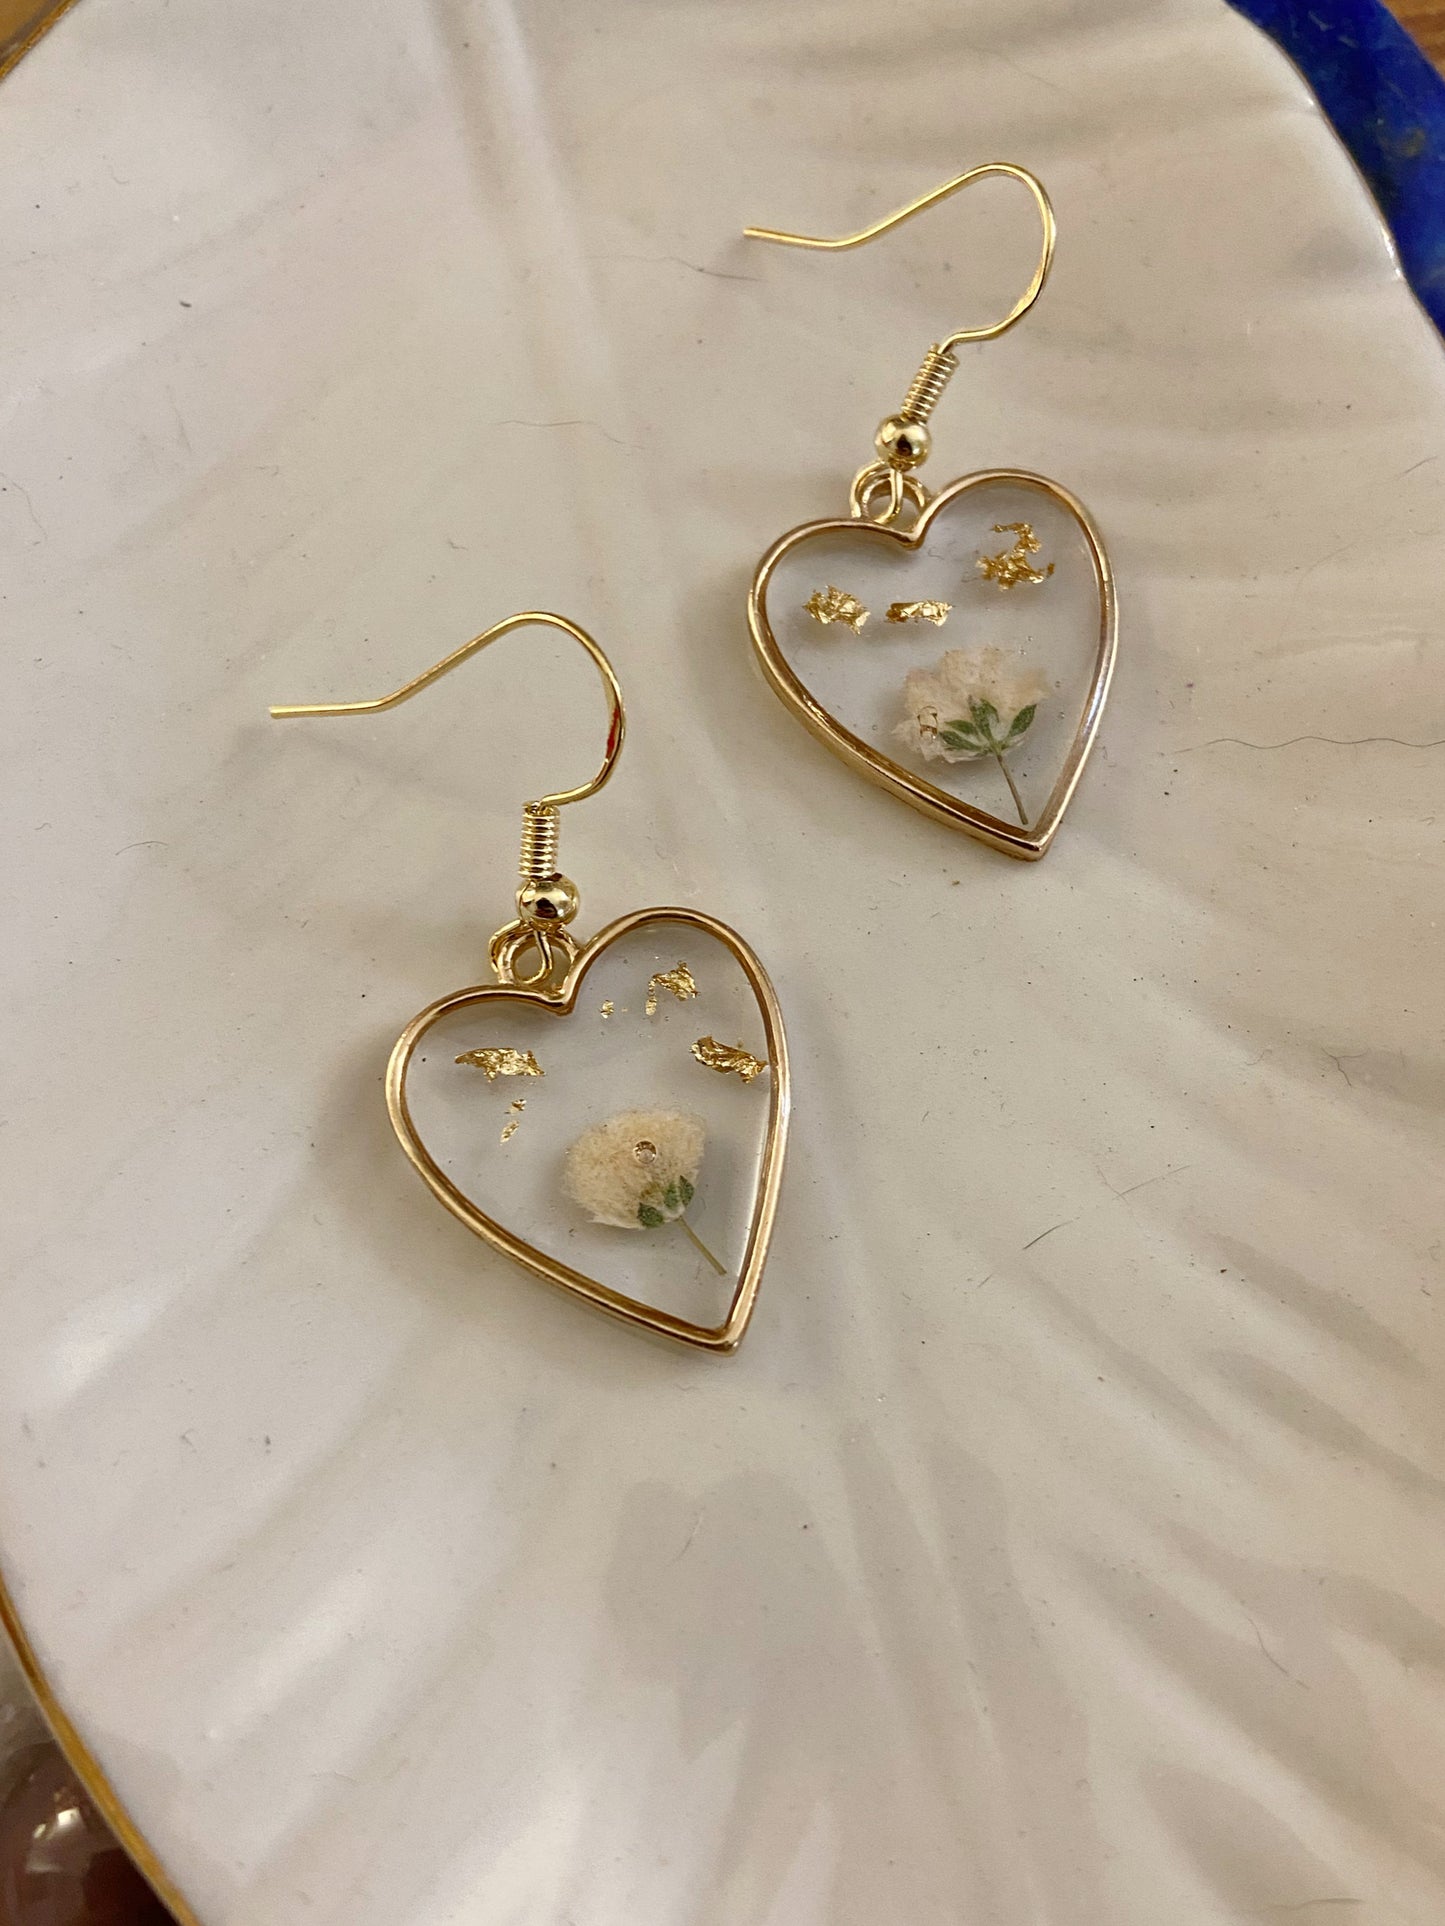 Baby's Breath - Real preserved flowers & gold flake inside gold open heart earrings, botanical plant jewelry